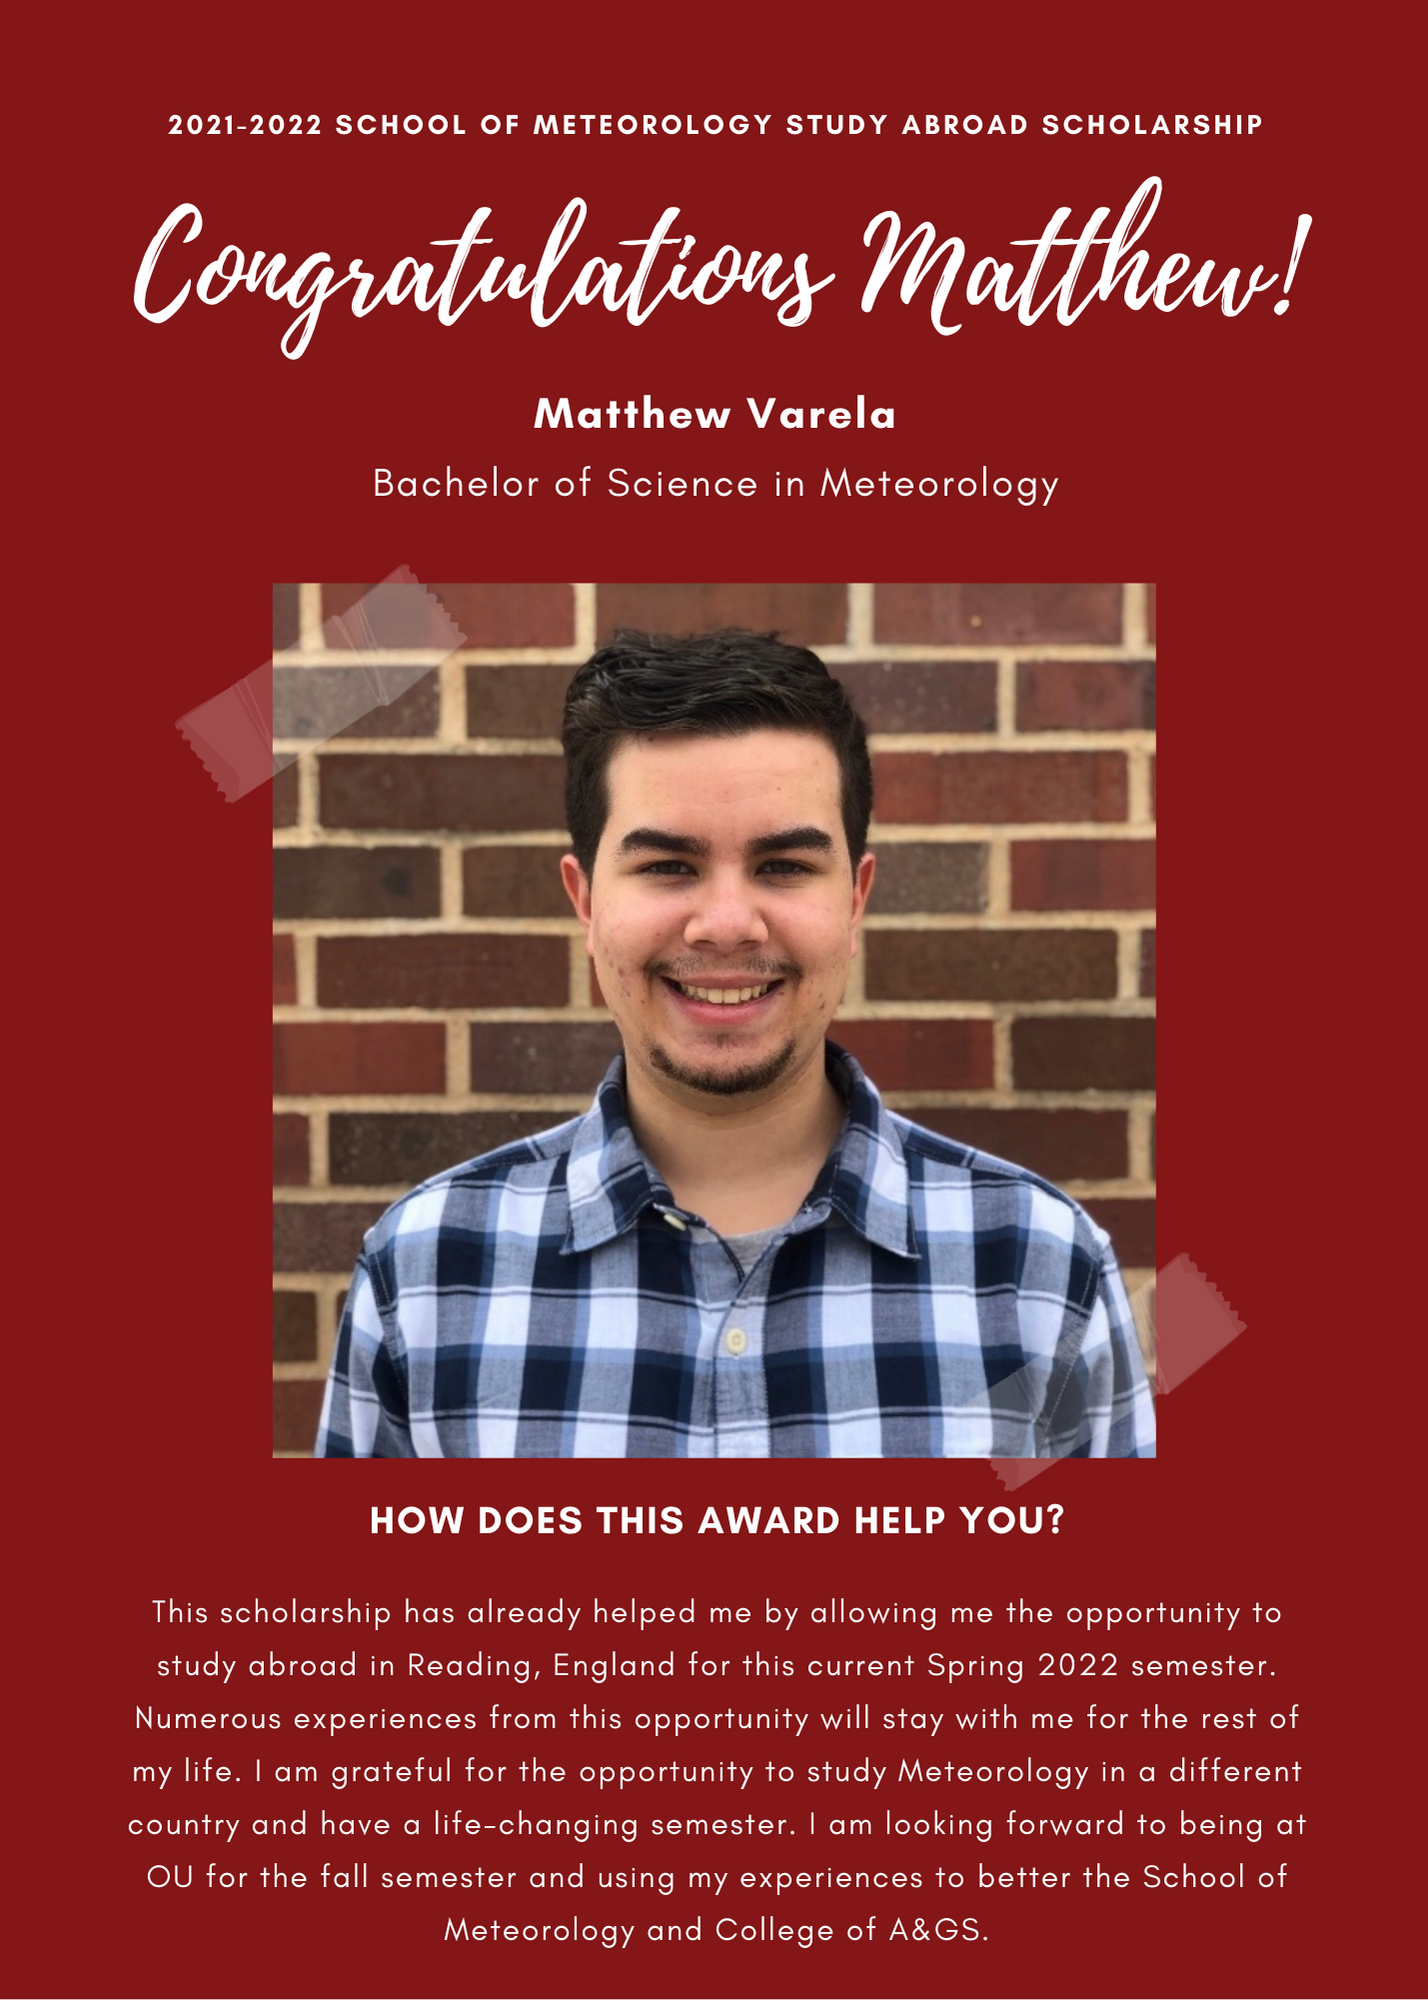 2021 -2022 A&GS SOM Study Abroad Scholarships. Congratulations Mathew! Mathew Varela. Bachelor of Science in Meteorology. How does this award help you? This scholarship has already helped me by allowing me the opportunity to study abroad in reading, england for this current spring 2022 semester. Numerous experiences from this opportunity will stay with me for teh rest of my life. I am grateful for the opportunity to study meteorology in a different country and have a life-changing semester. I am looking forward to being at OU for teh fall semester and using my experiences to better the chool of meteorology and the college of A&GS